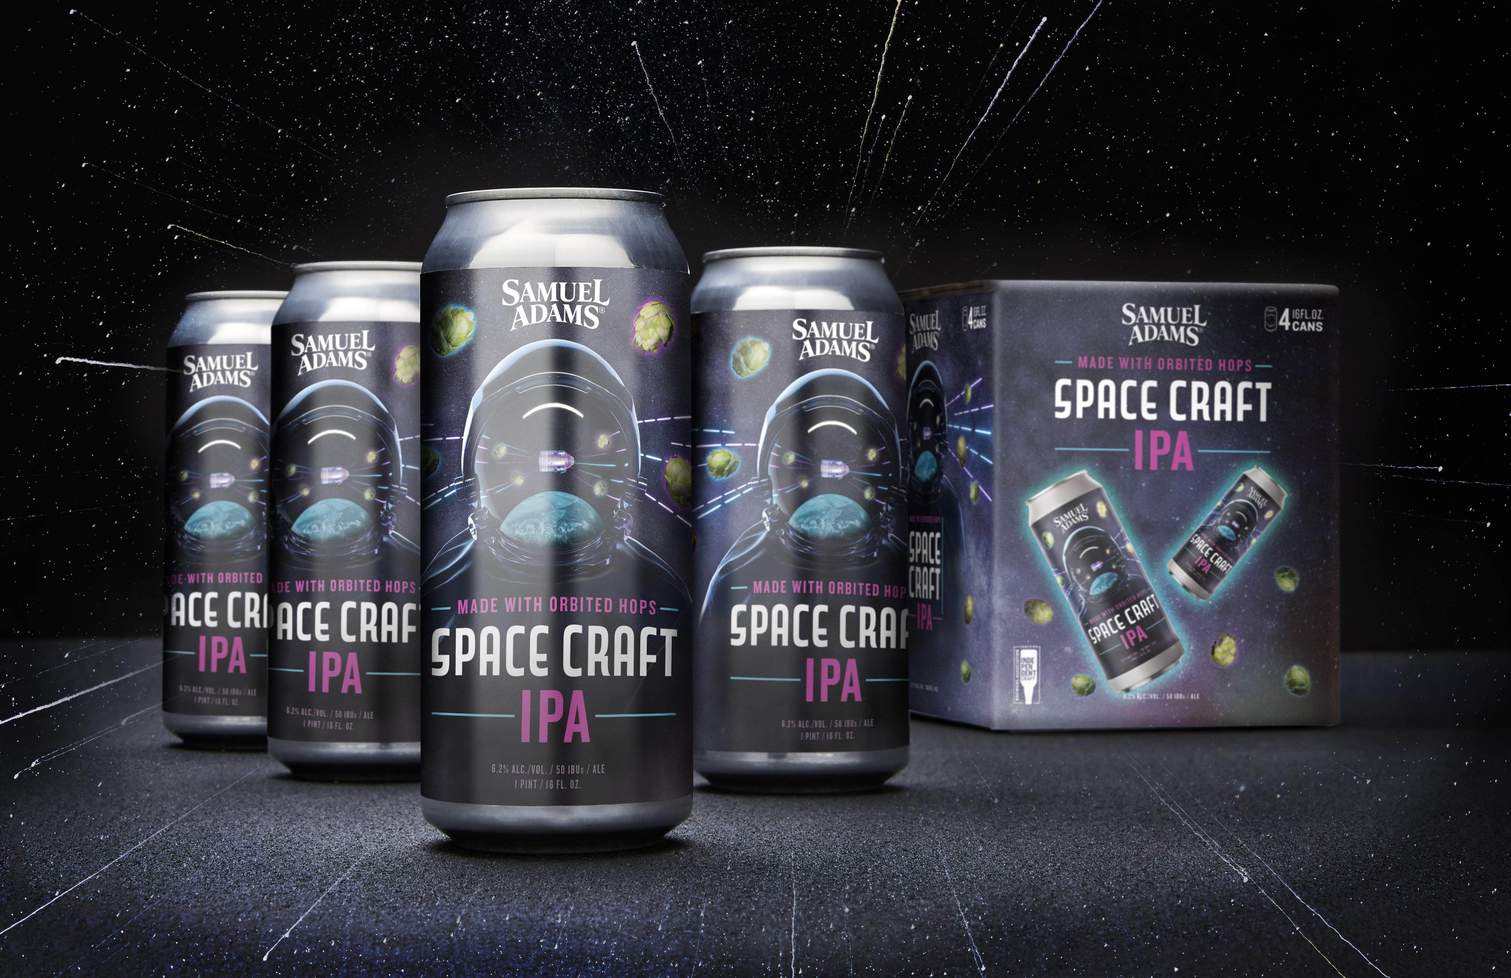 beer made from hops launched into space goes on sale